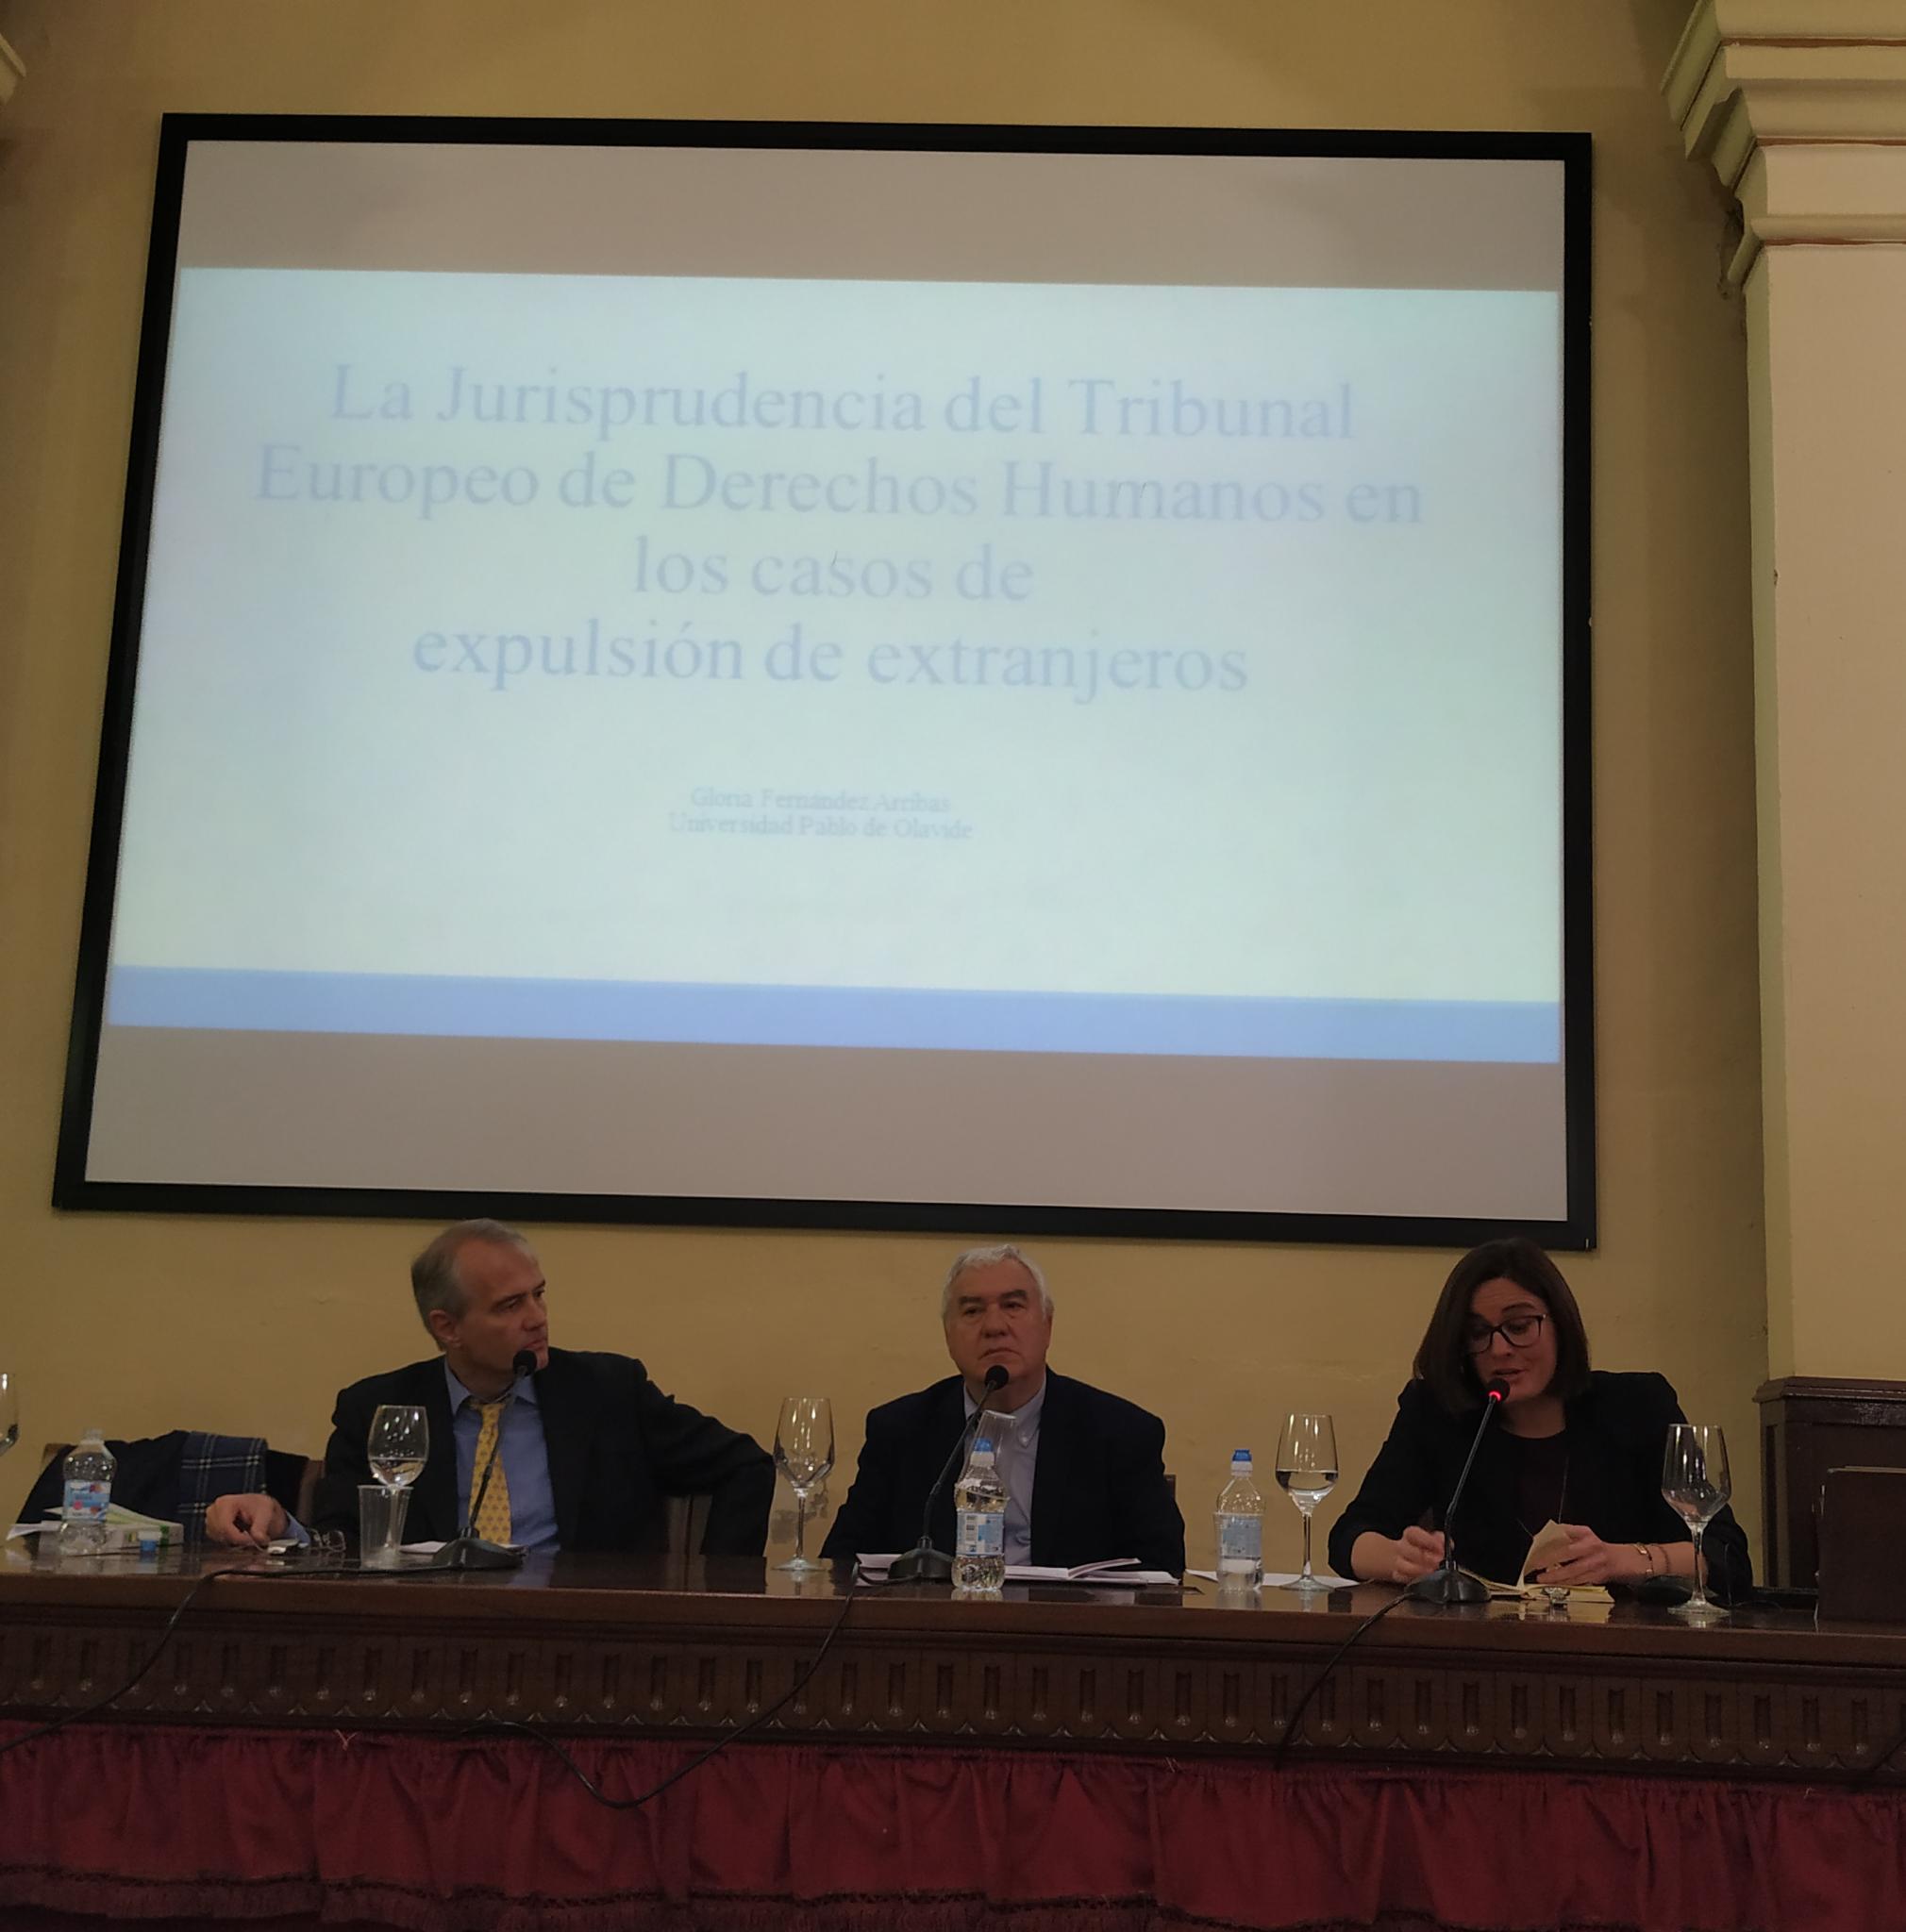 Image in which you can see the intervention of professors Roldán Barbero and Fernández Arribas, behind them is a projector screen